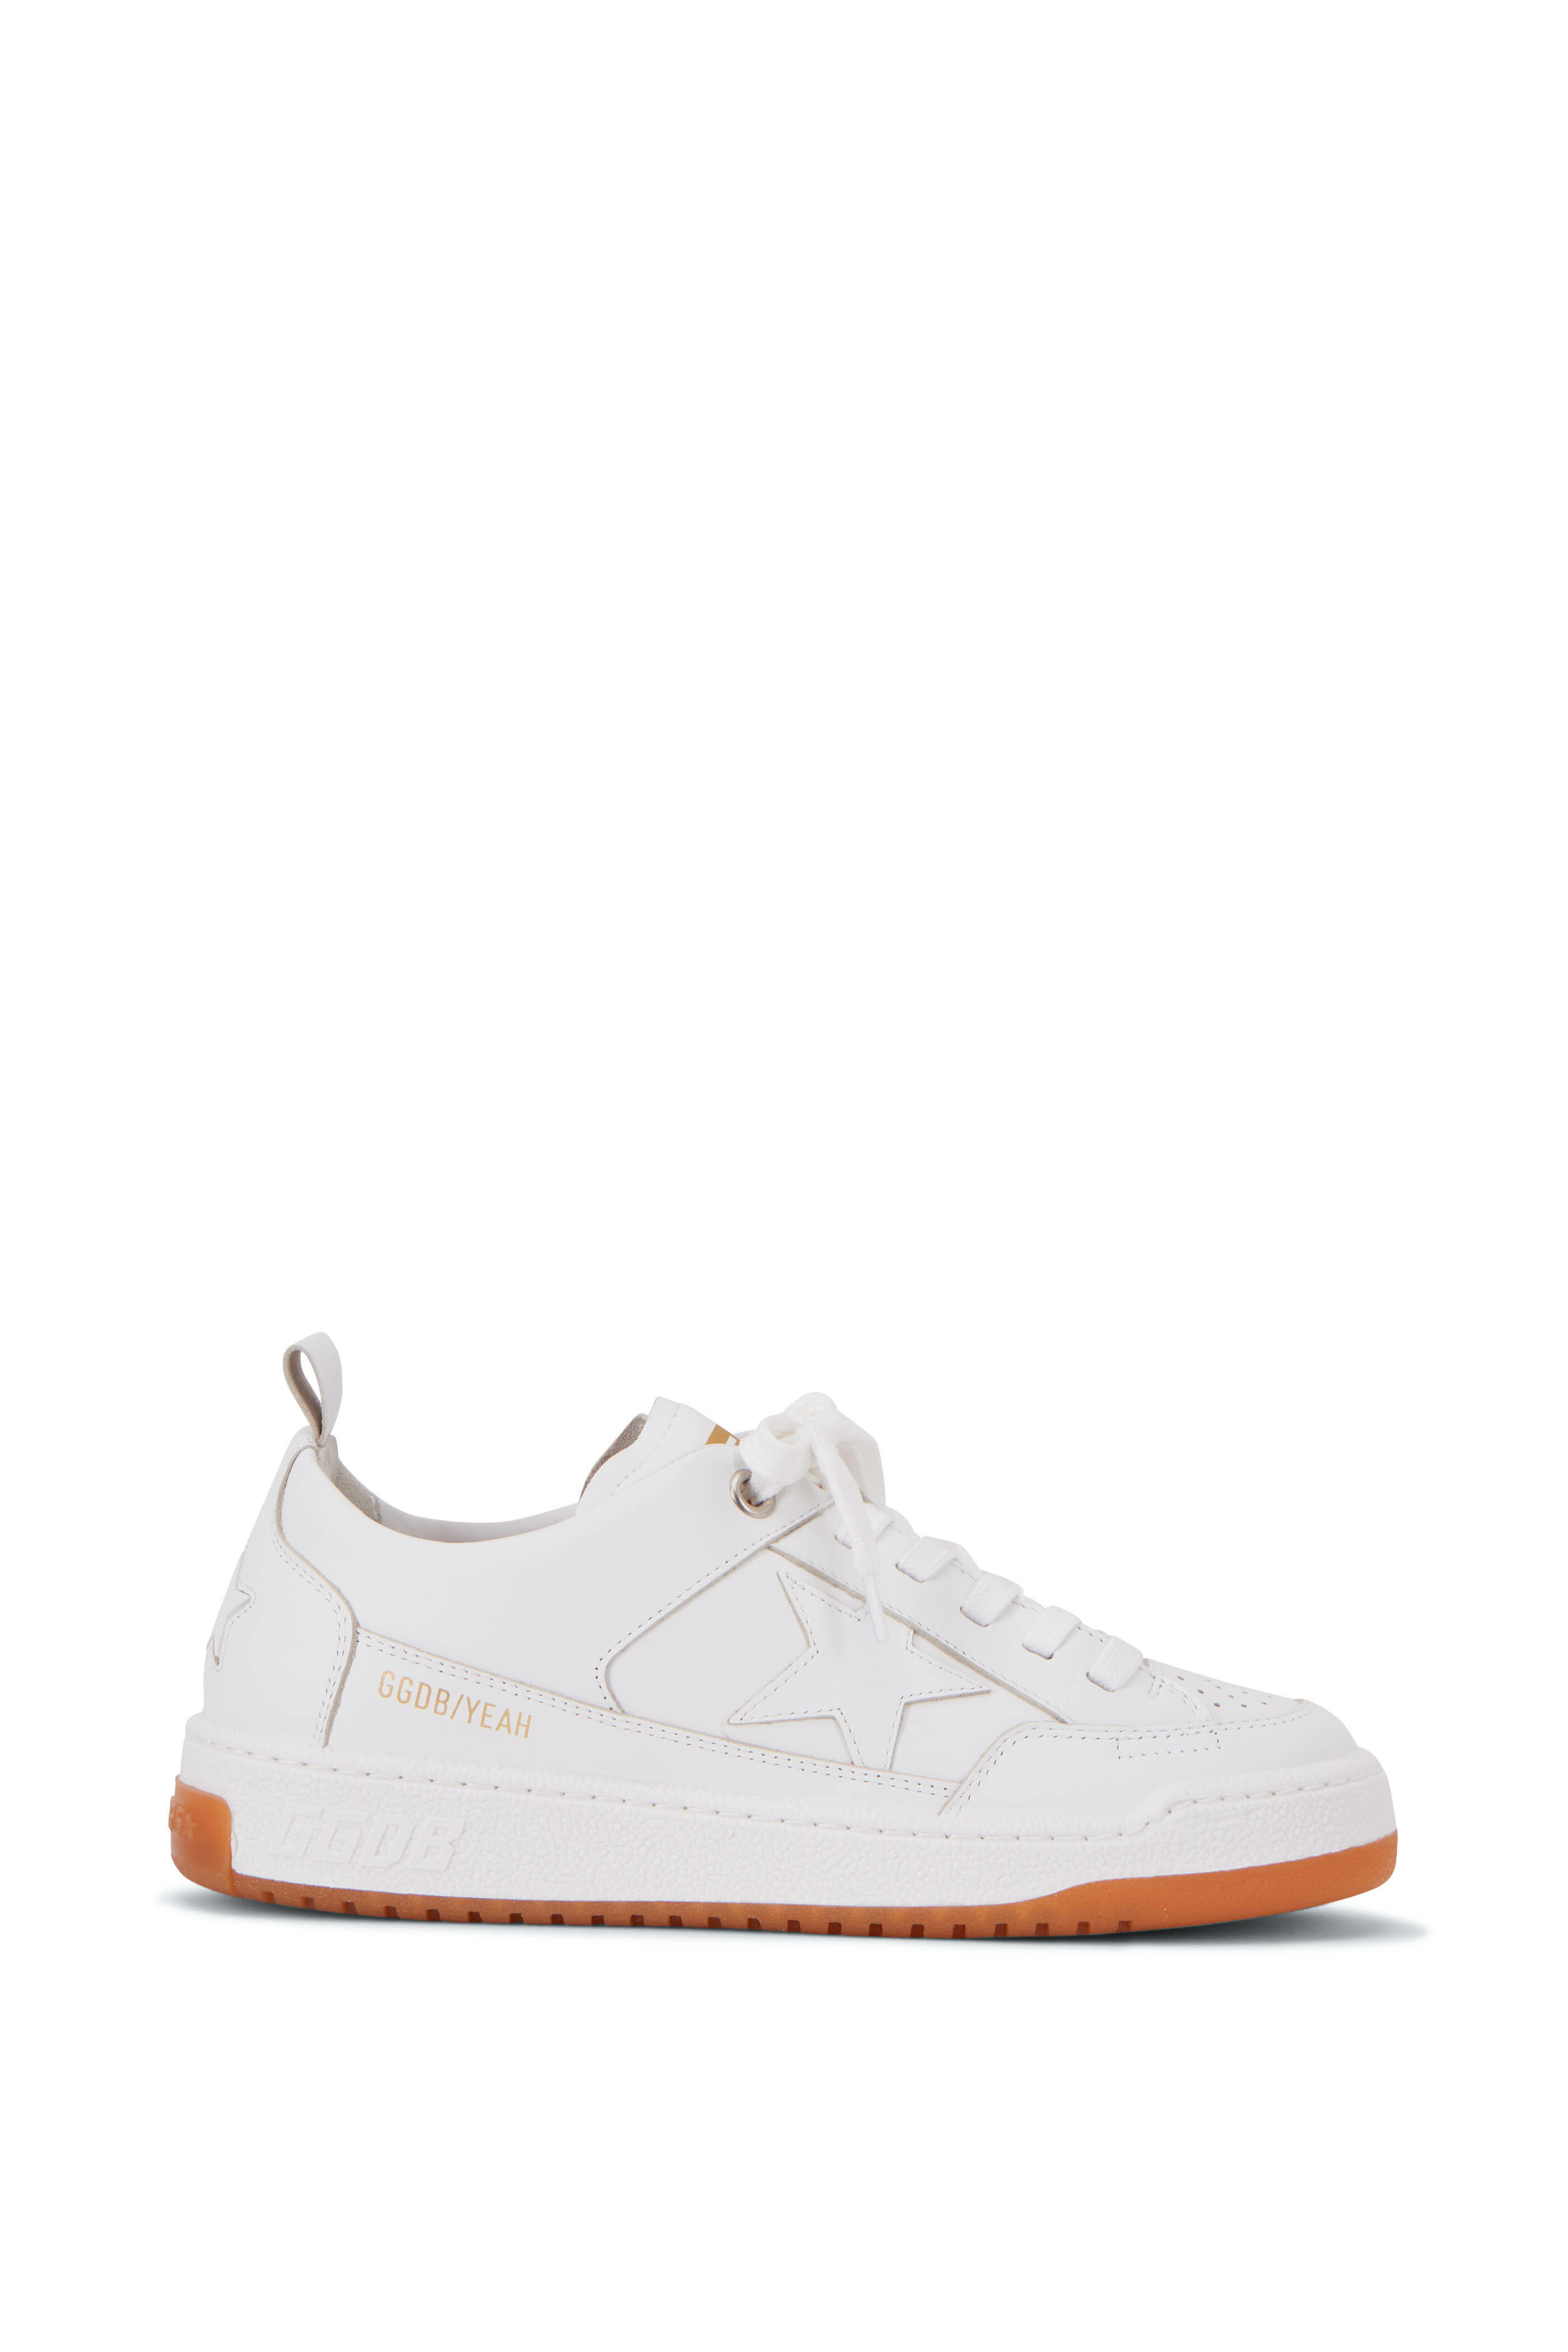 Golden Goose - Yeah! White Leather Low-Top Sneaker